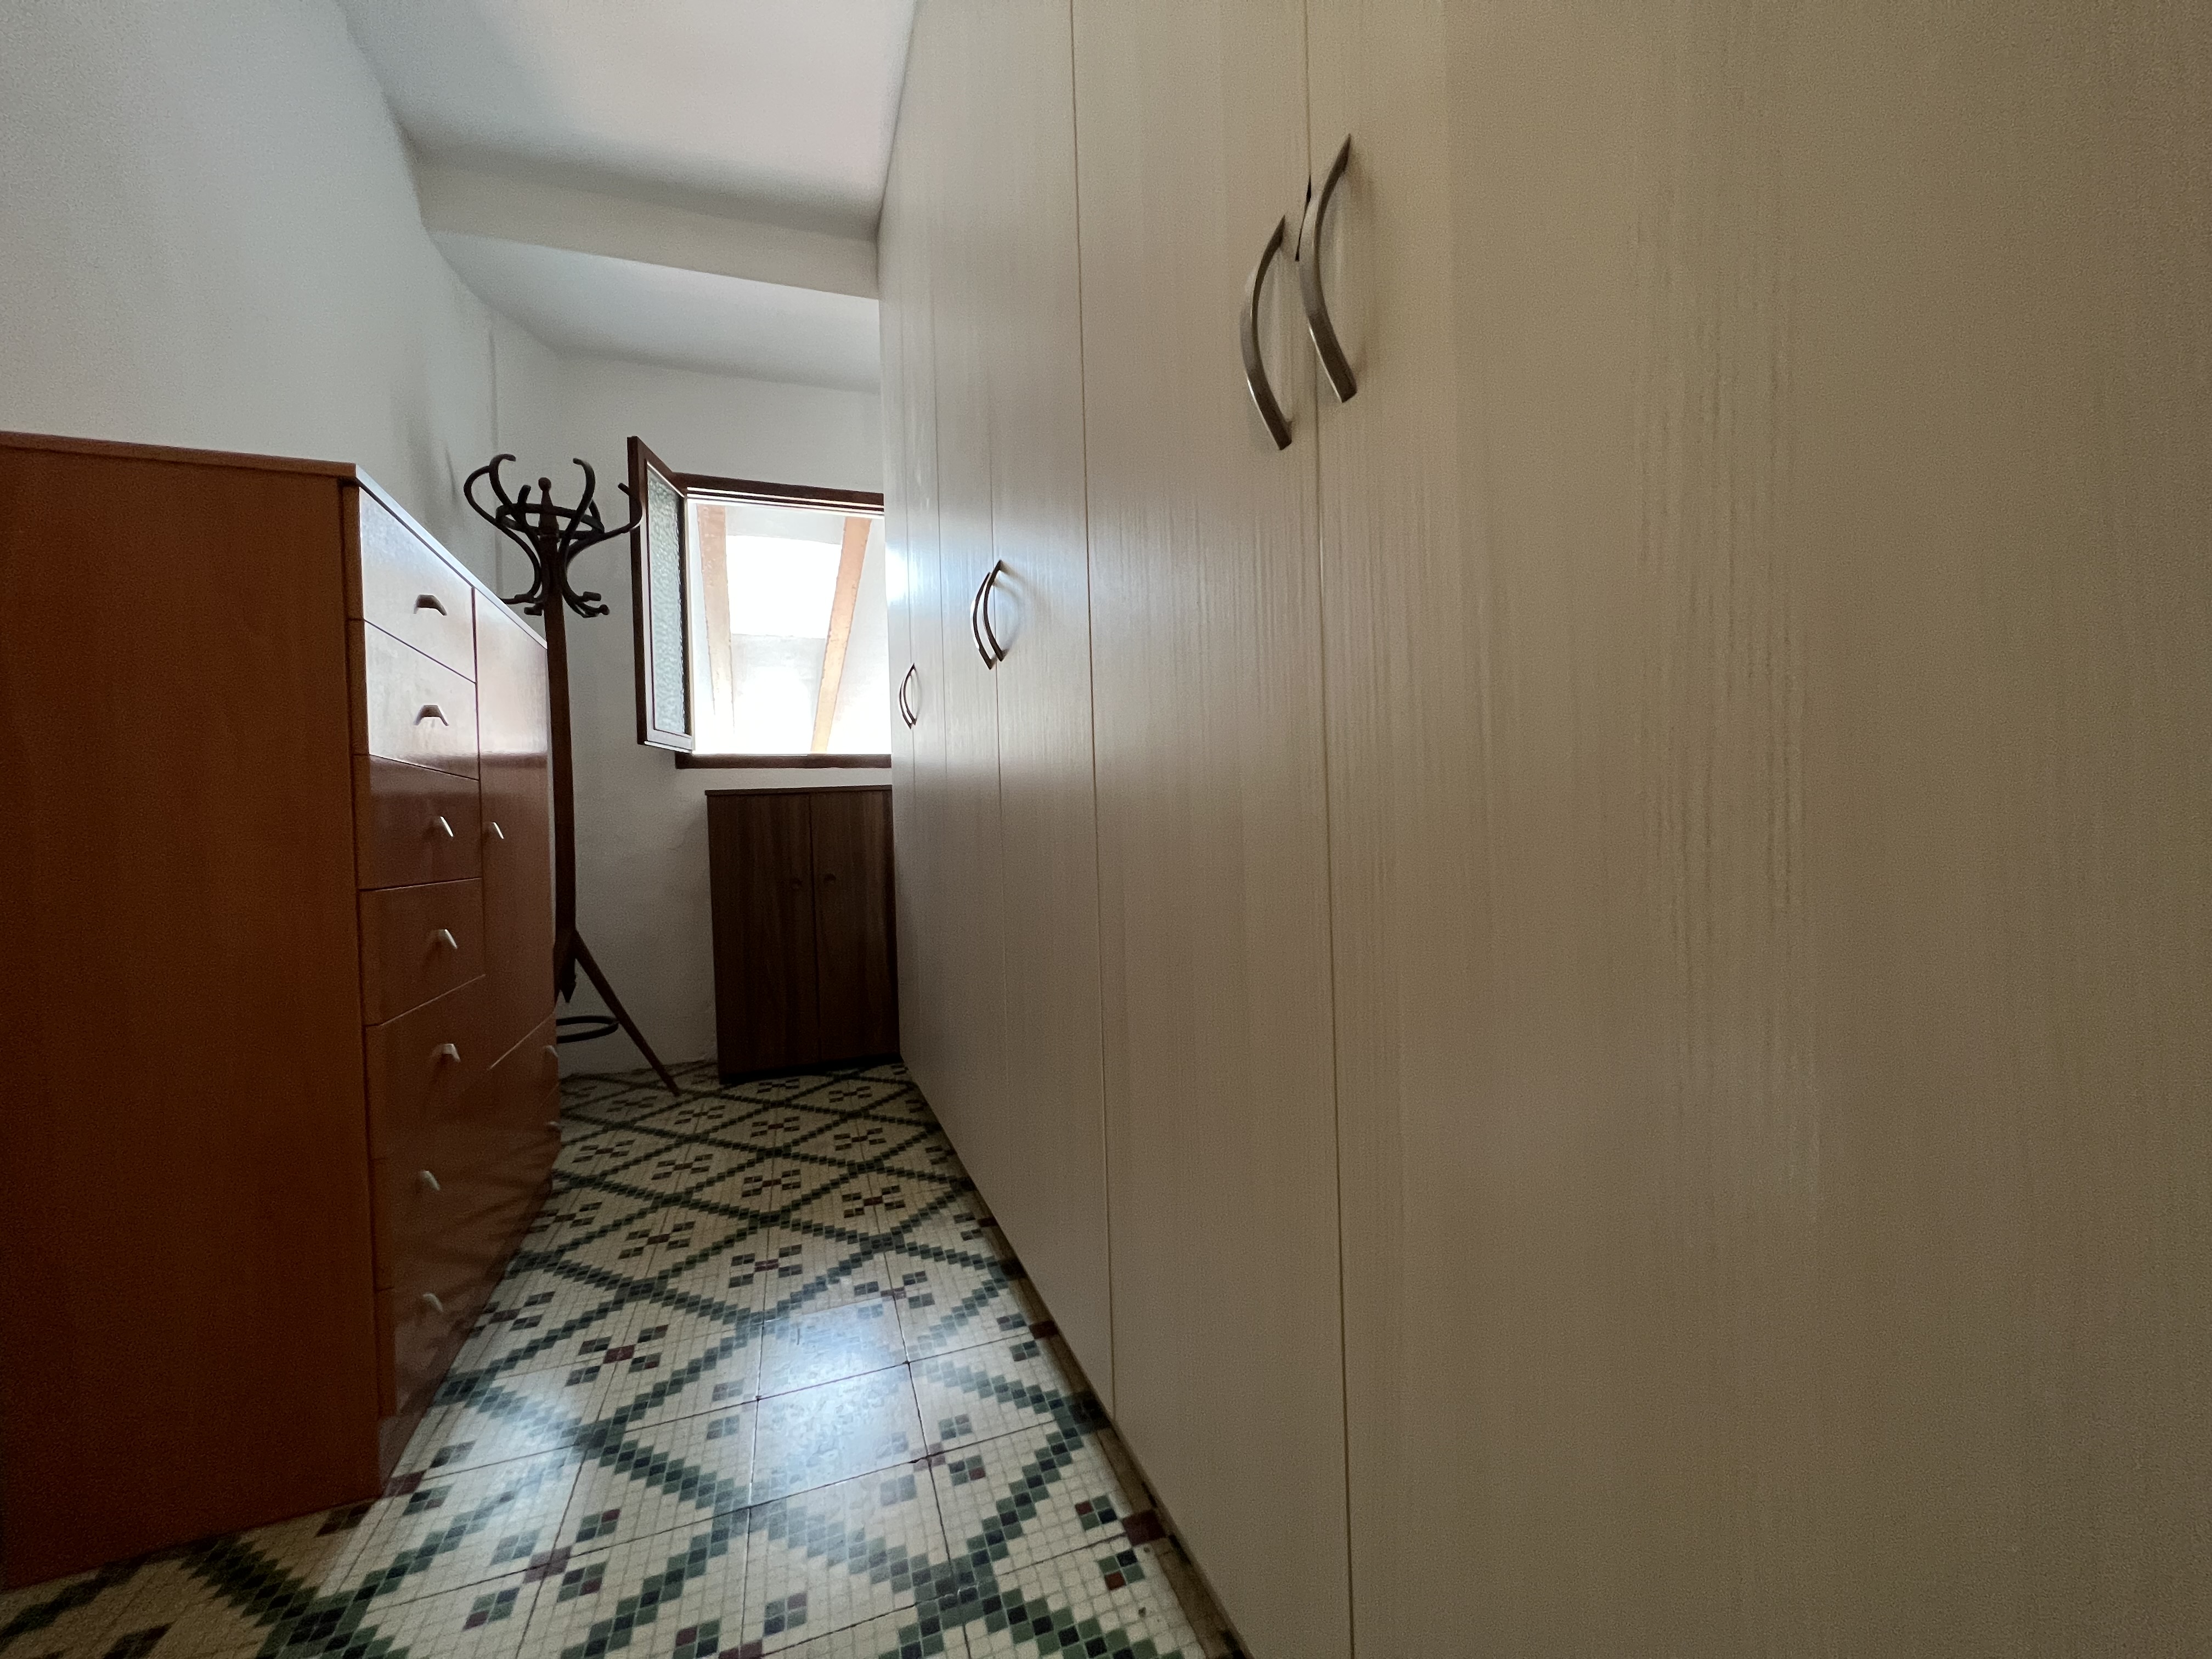 HOUSE FOR SALE IN BENISSA